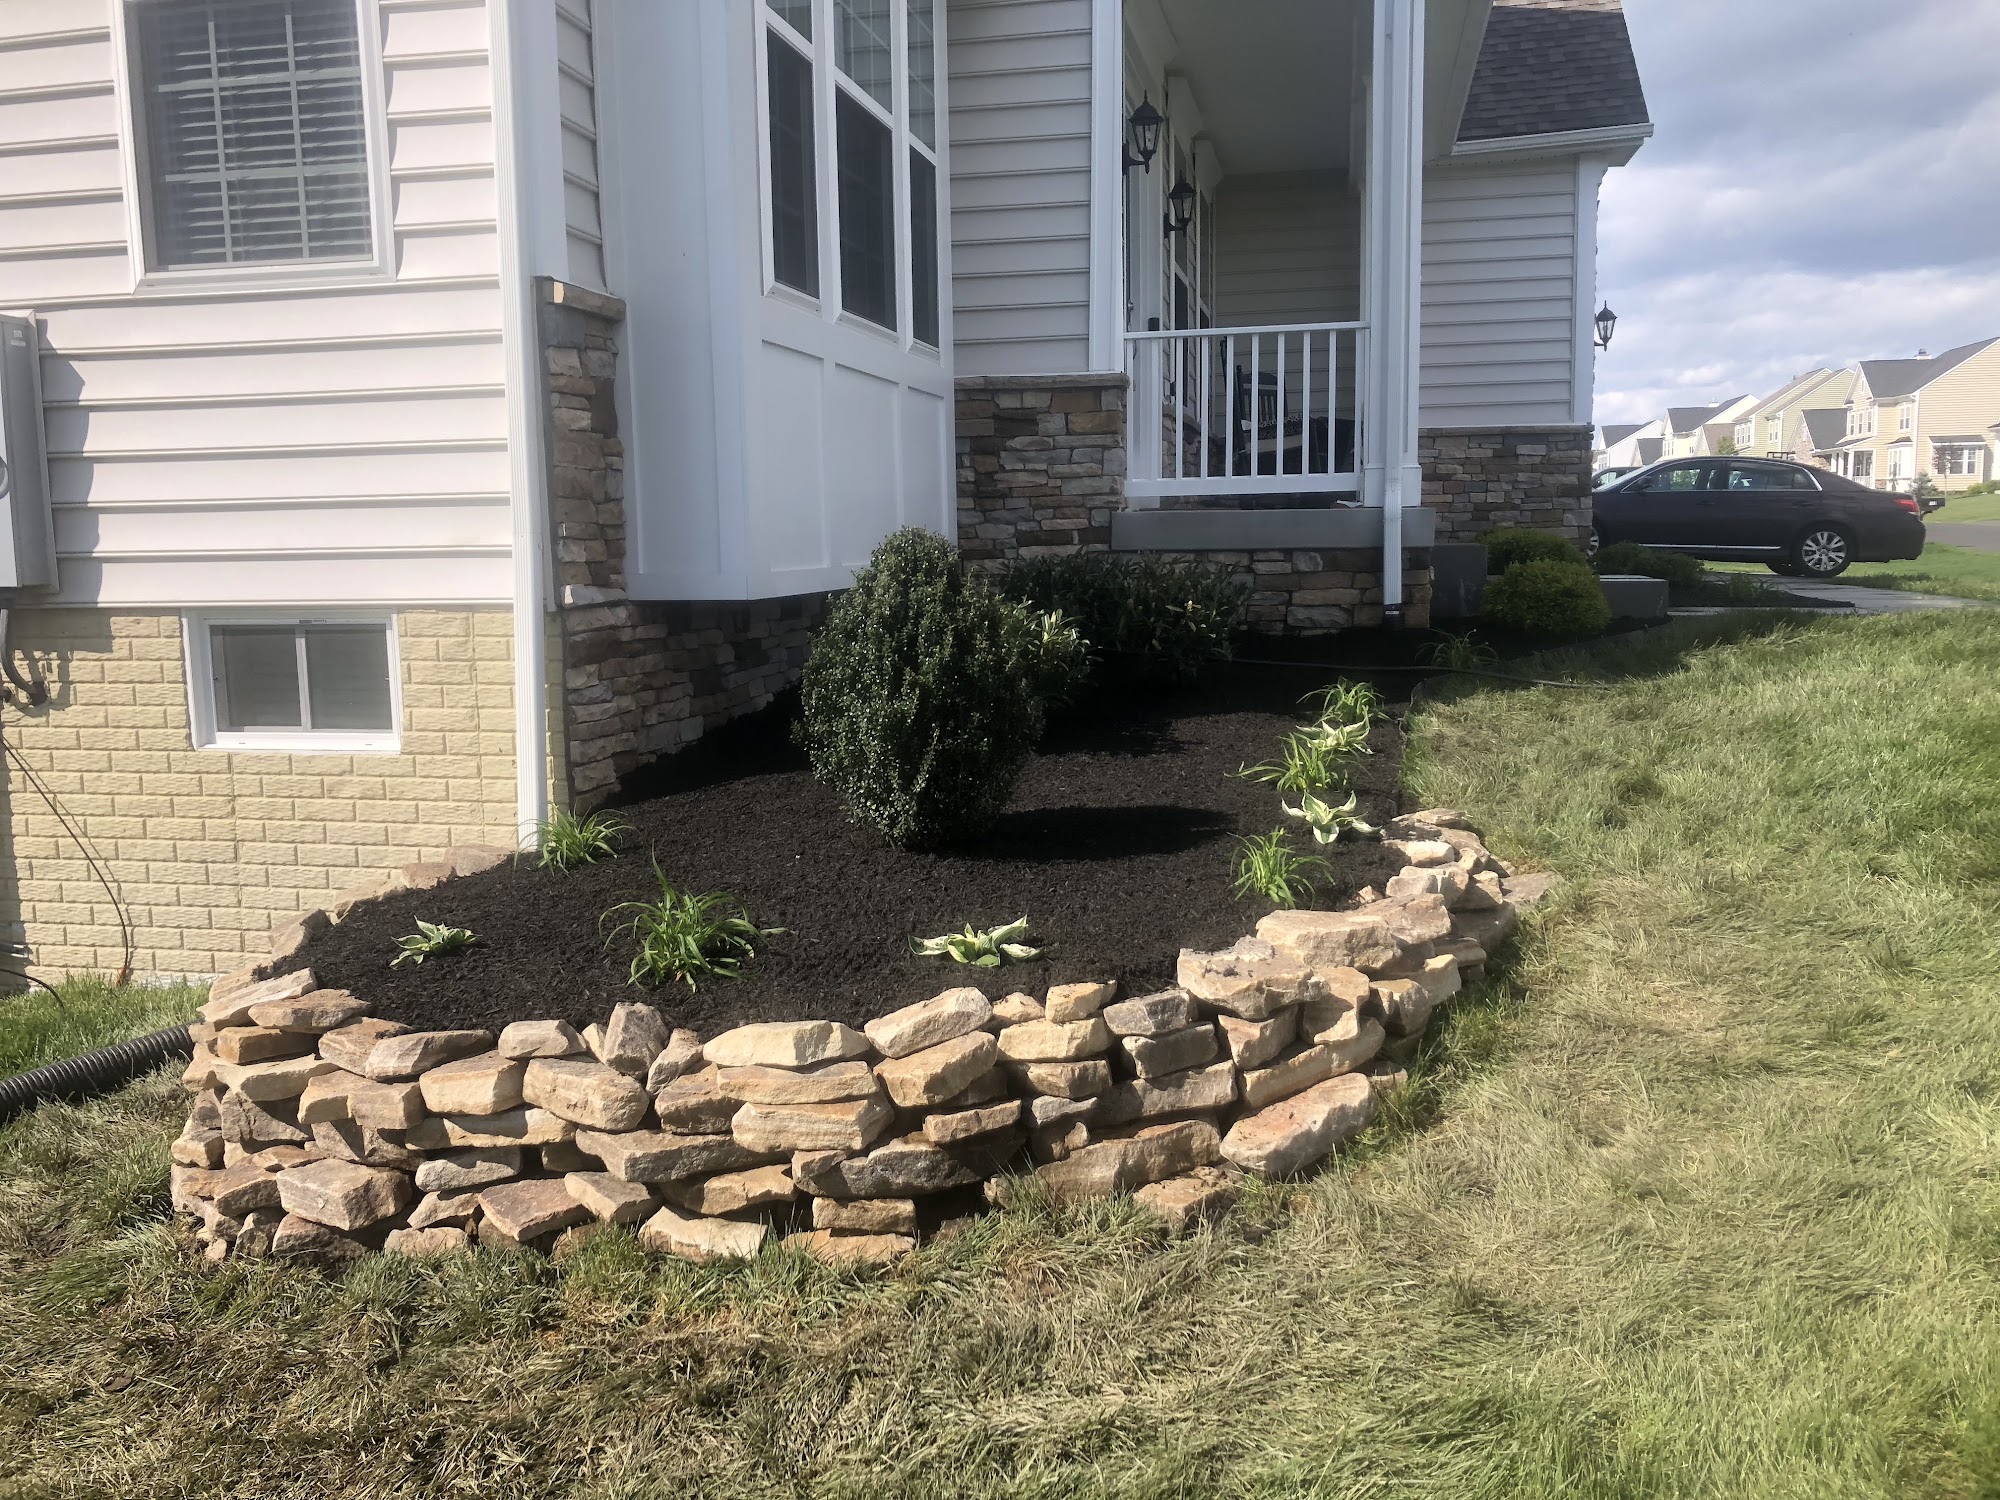 Quality Lawn Care LLC | Residential, Lawn Mowing, Landscaping & Full Property Maintenance 4707 Schley Ave #365, Braddock Heights Maryland 21714